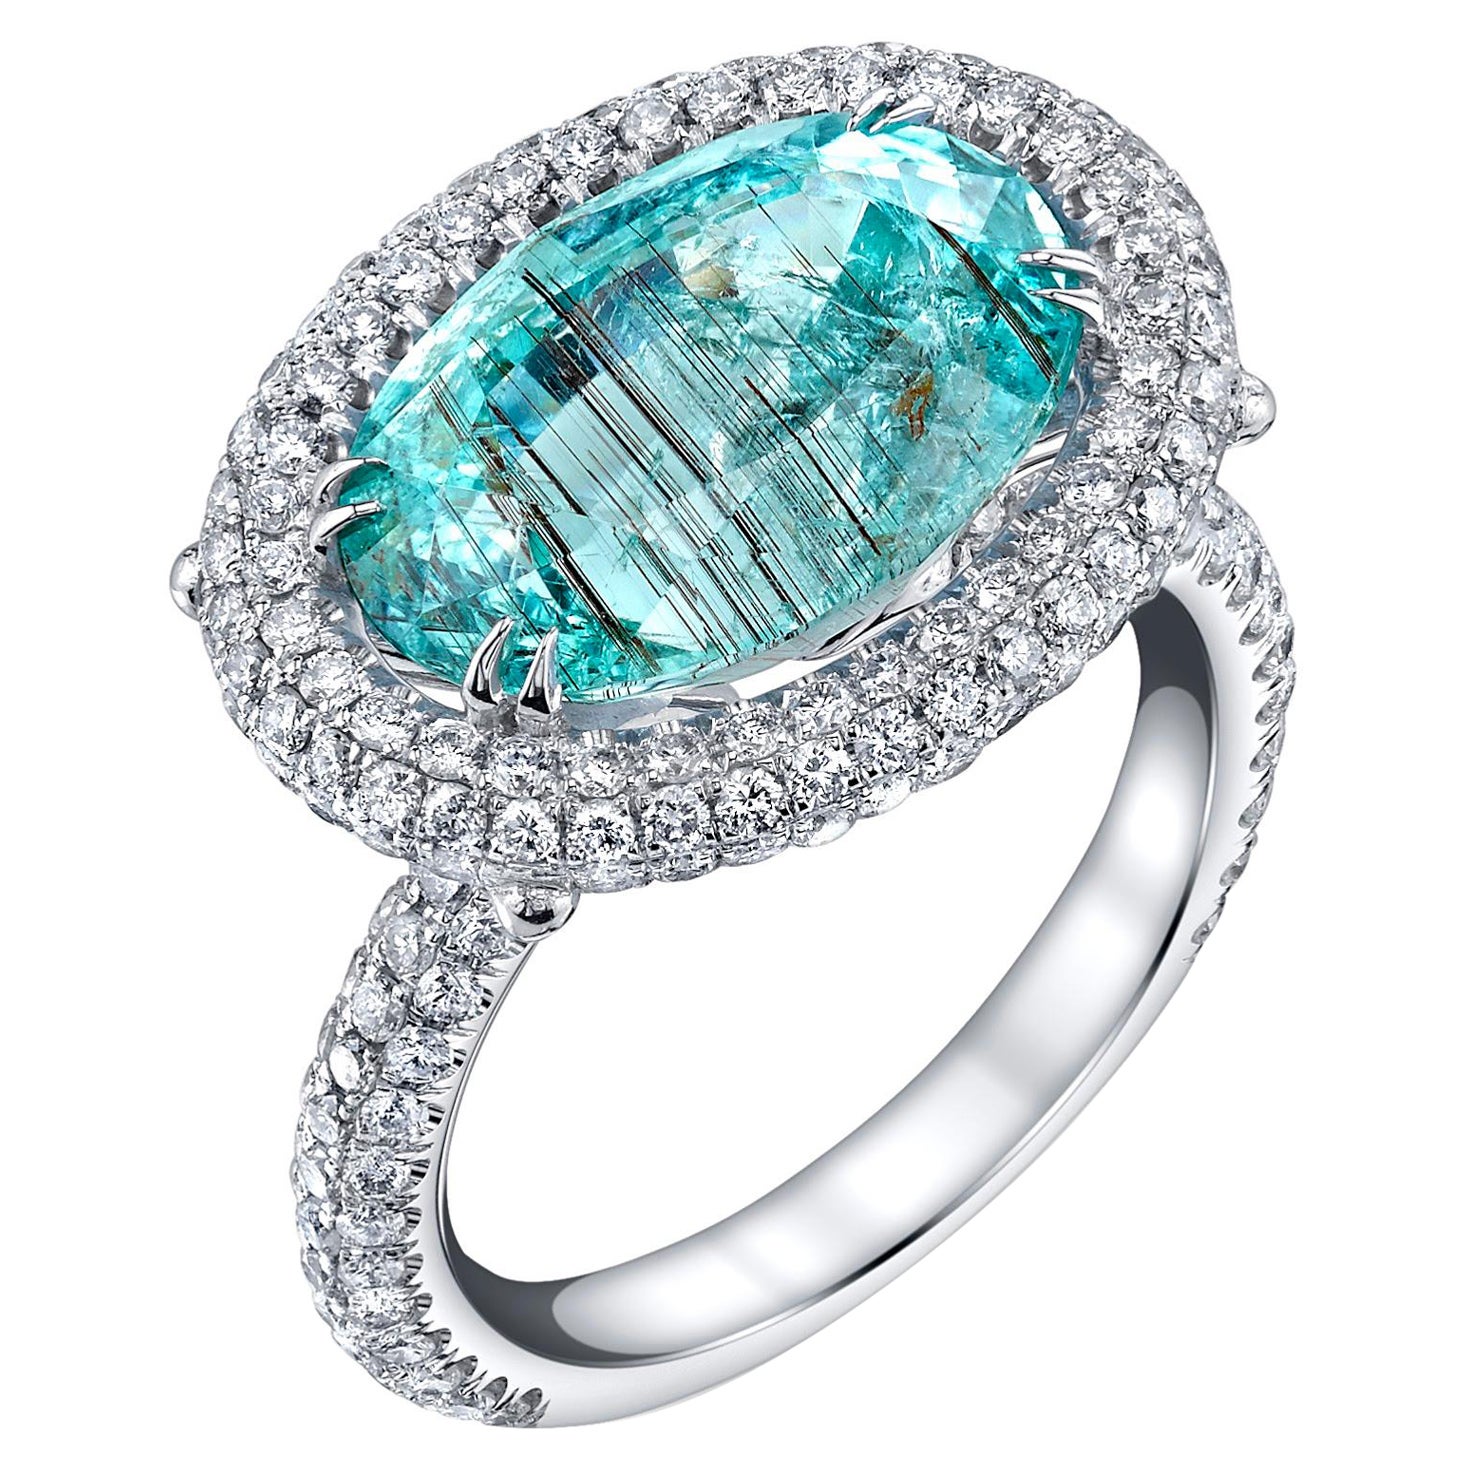 3.88ct Paraiba Tourmaline Ring Set in Platinum and Accented with Diamonds For Sale